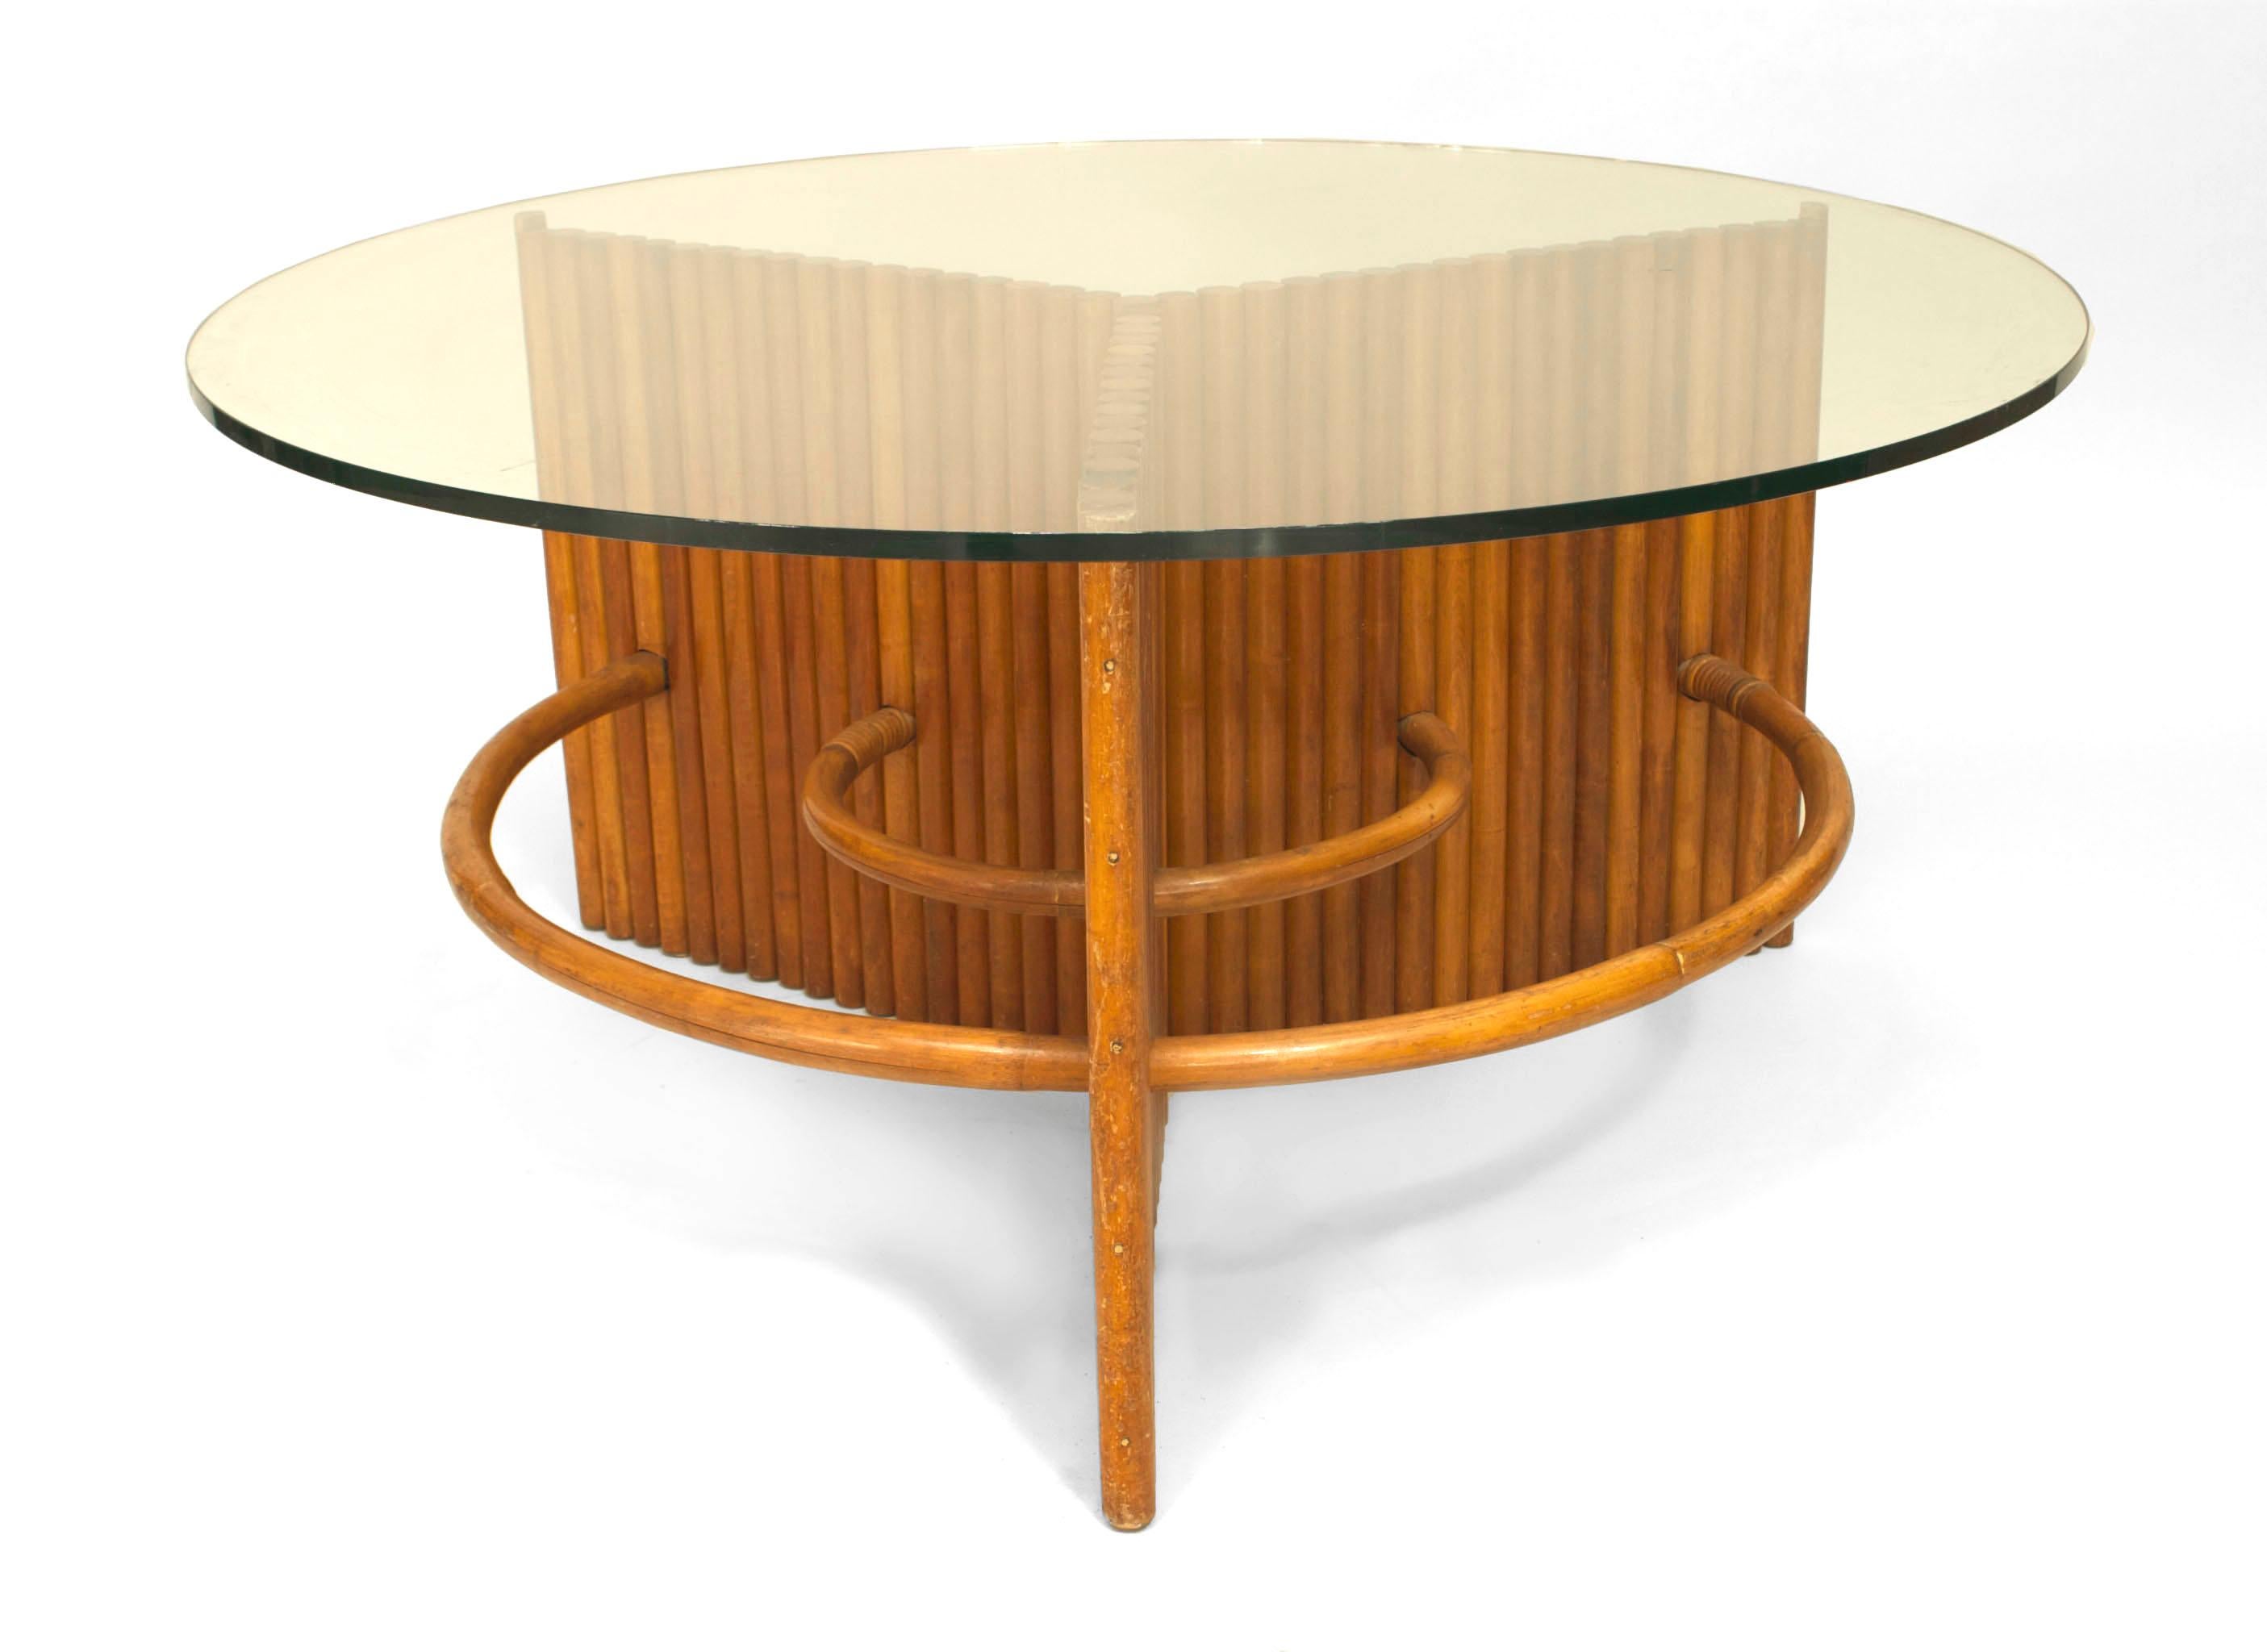 American Art Moderne (1930s) coffee table with a slat pine faux bamboo-style base and a round glass top. (attributed to: PAUL FRANKL)
